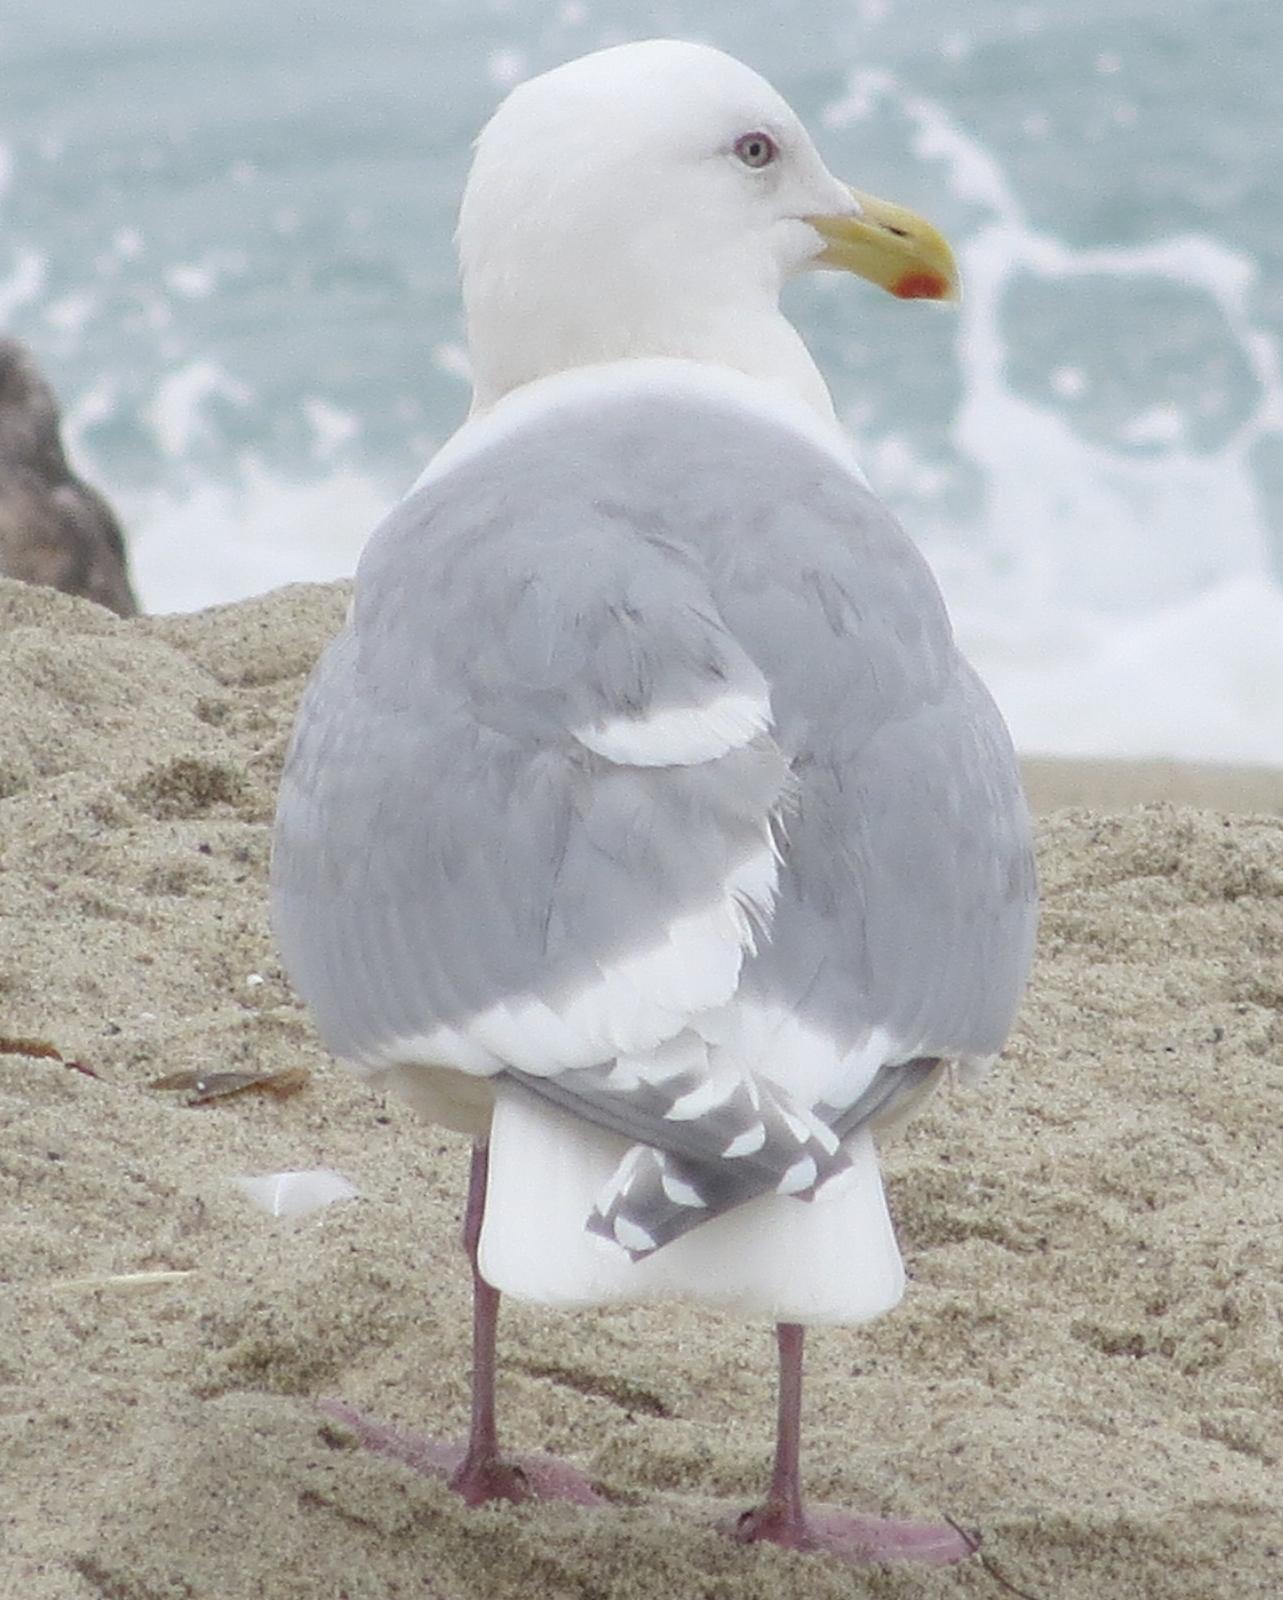 Glaucous-winged Gull Photo by Ryan Winkleman